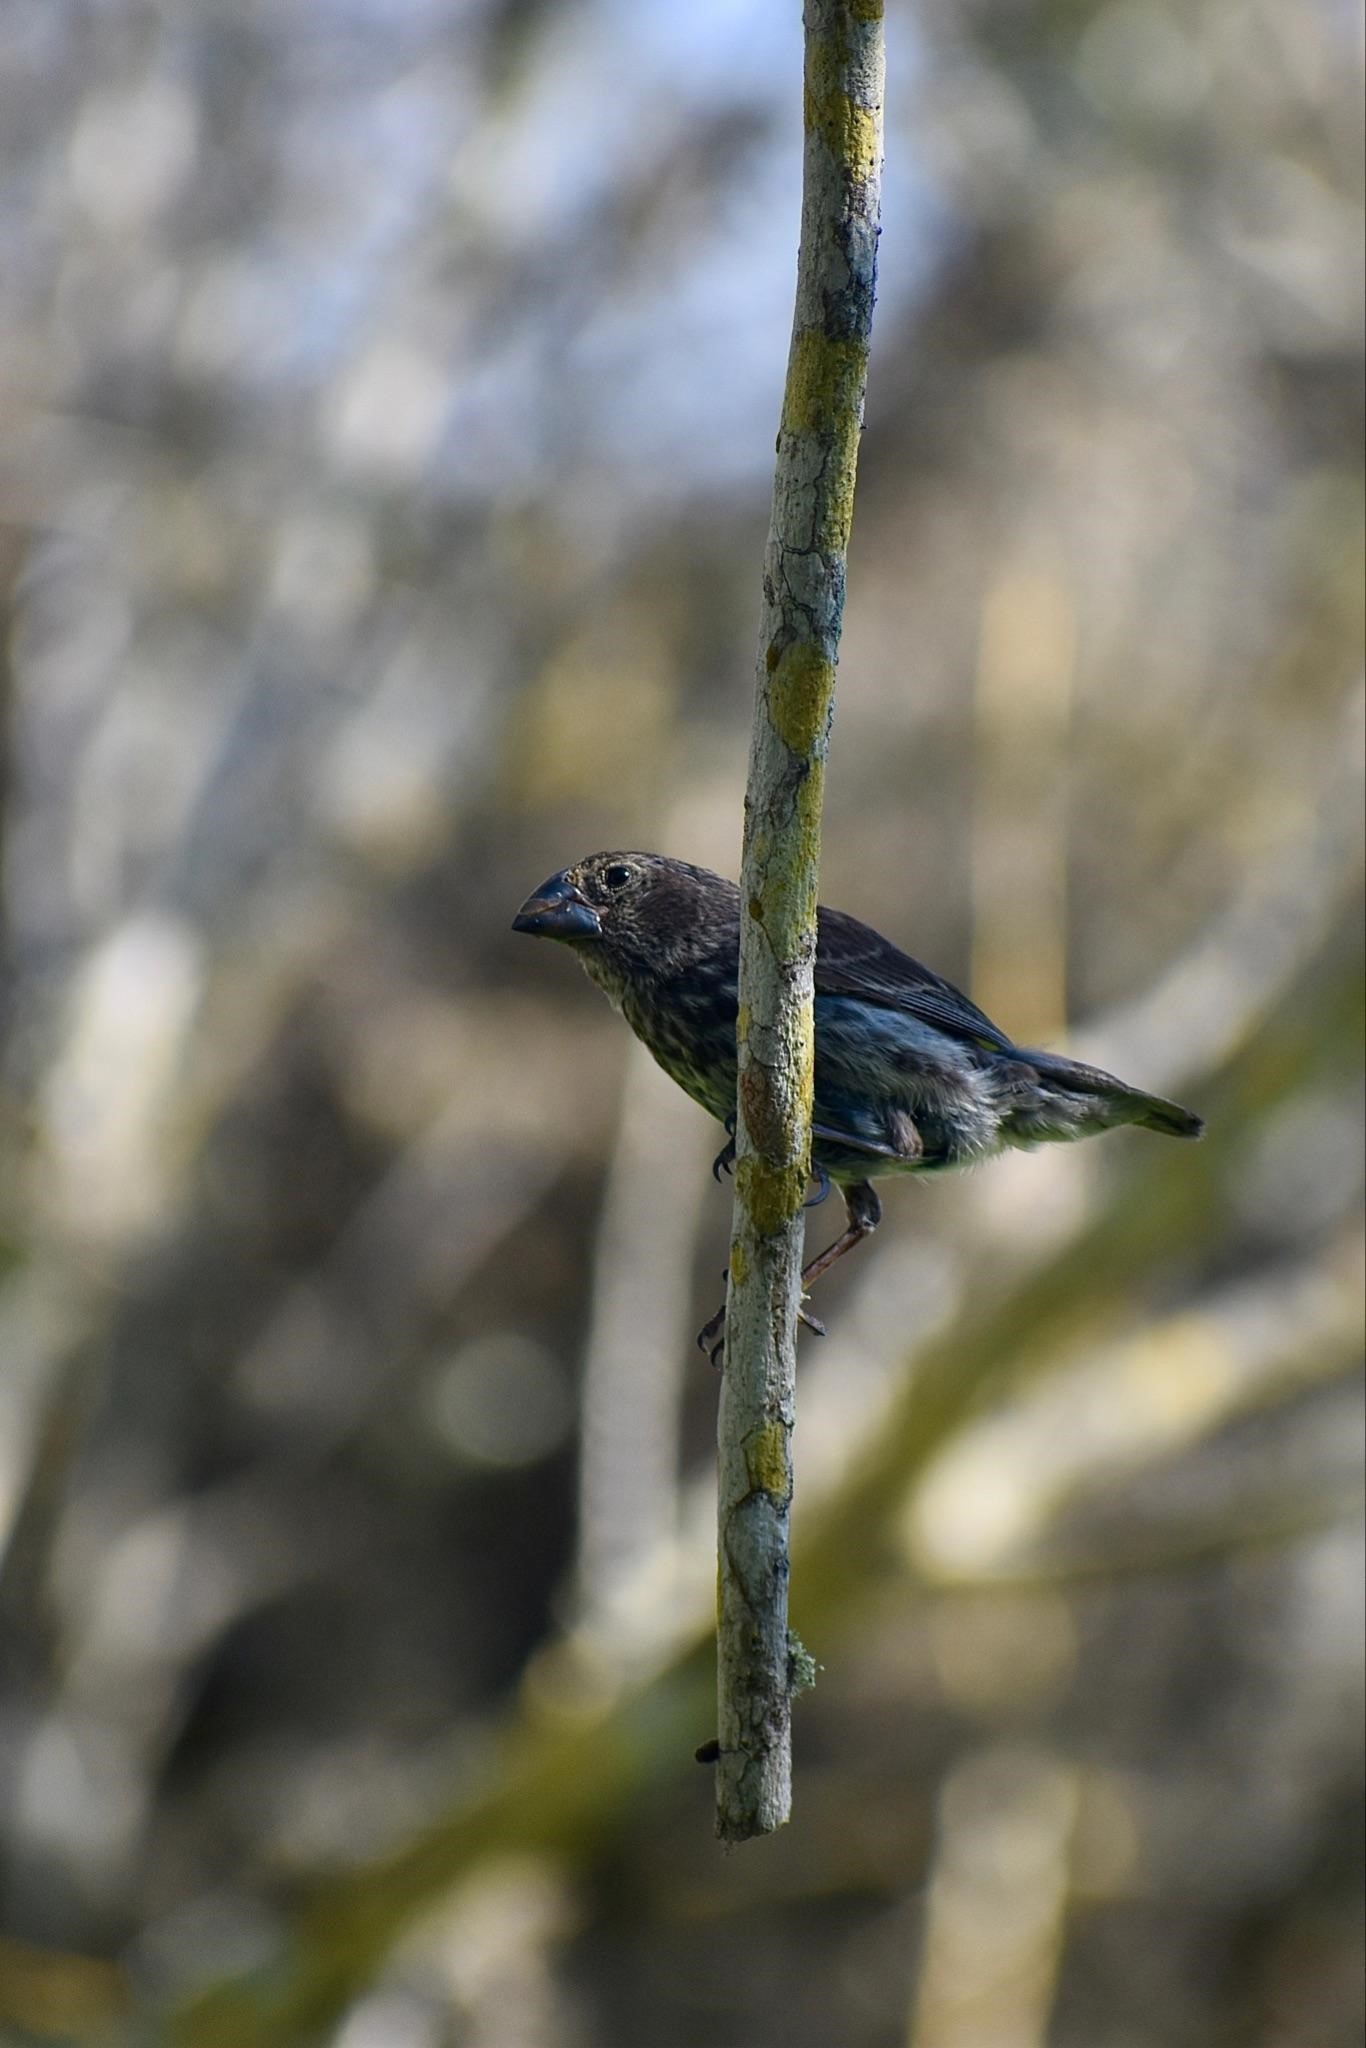 The medium ground finch, shown in the photo, is one of the species in the long-term study for which a fitness landscape was described. Photo: Marc-Olivier Beausoleil